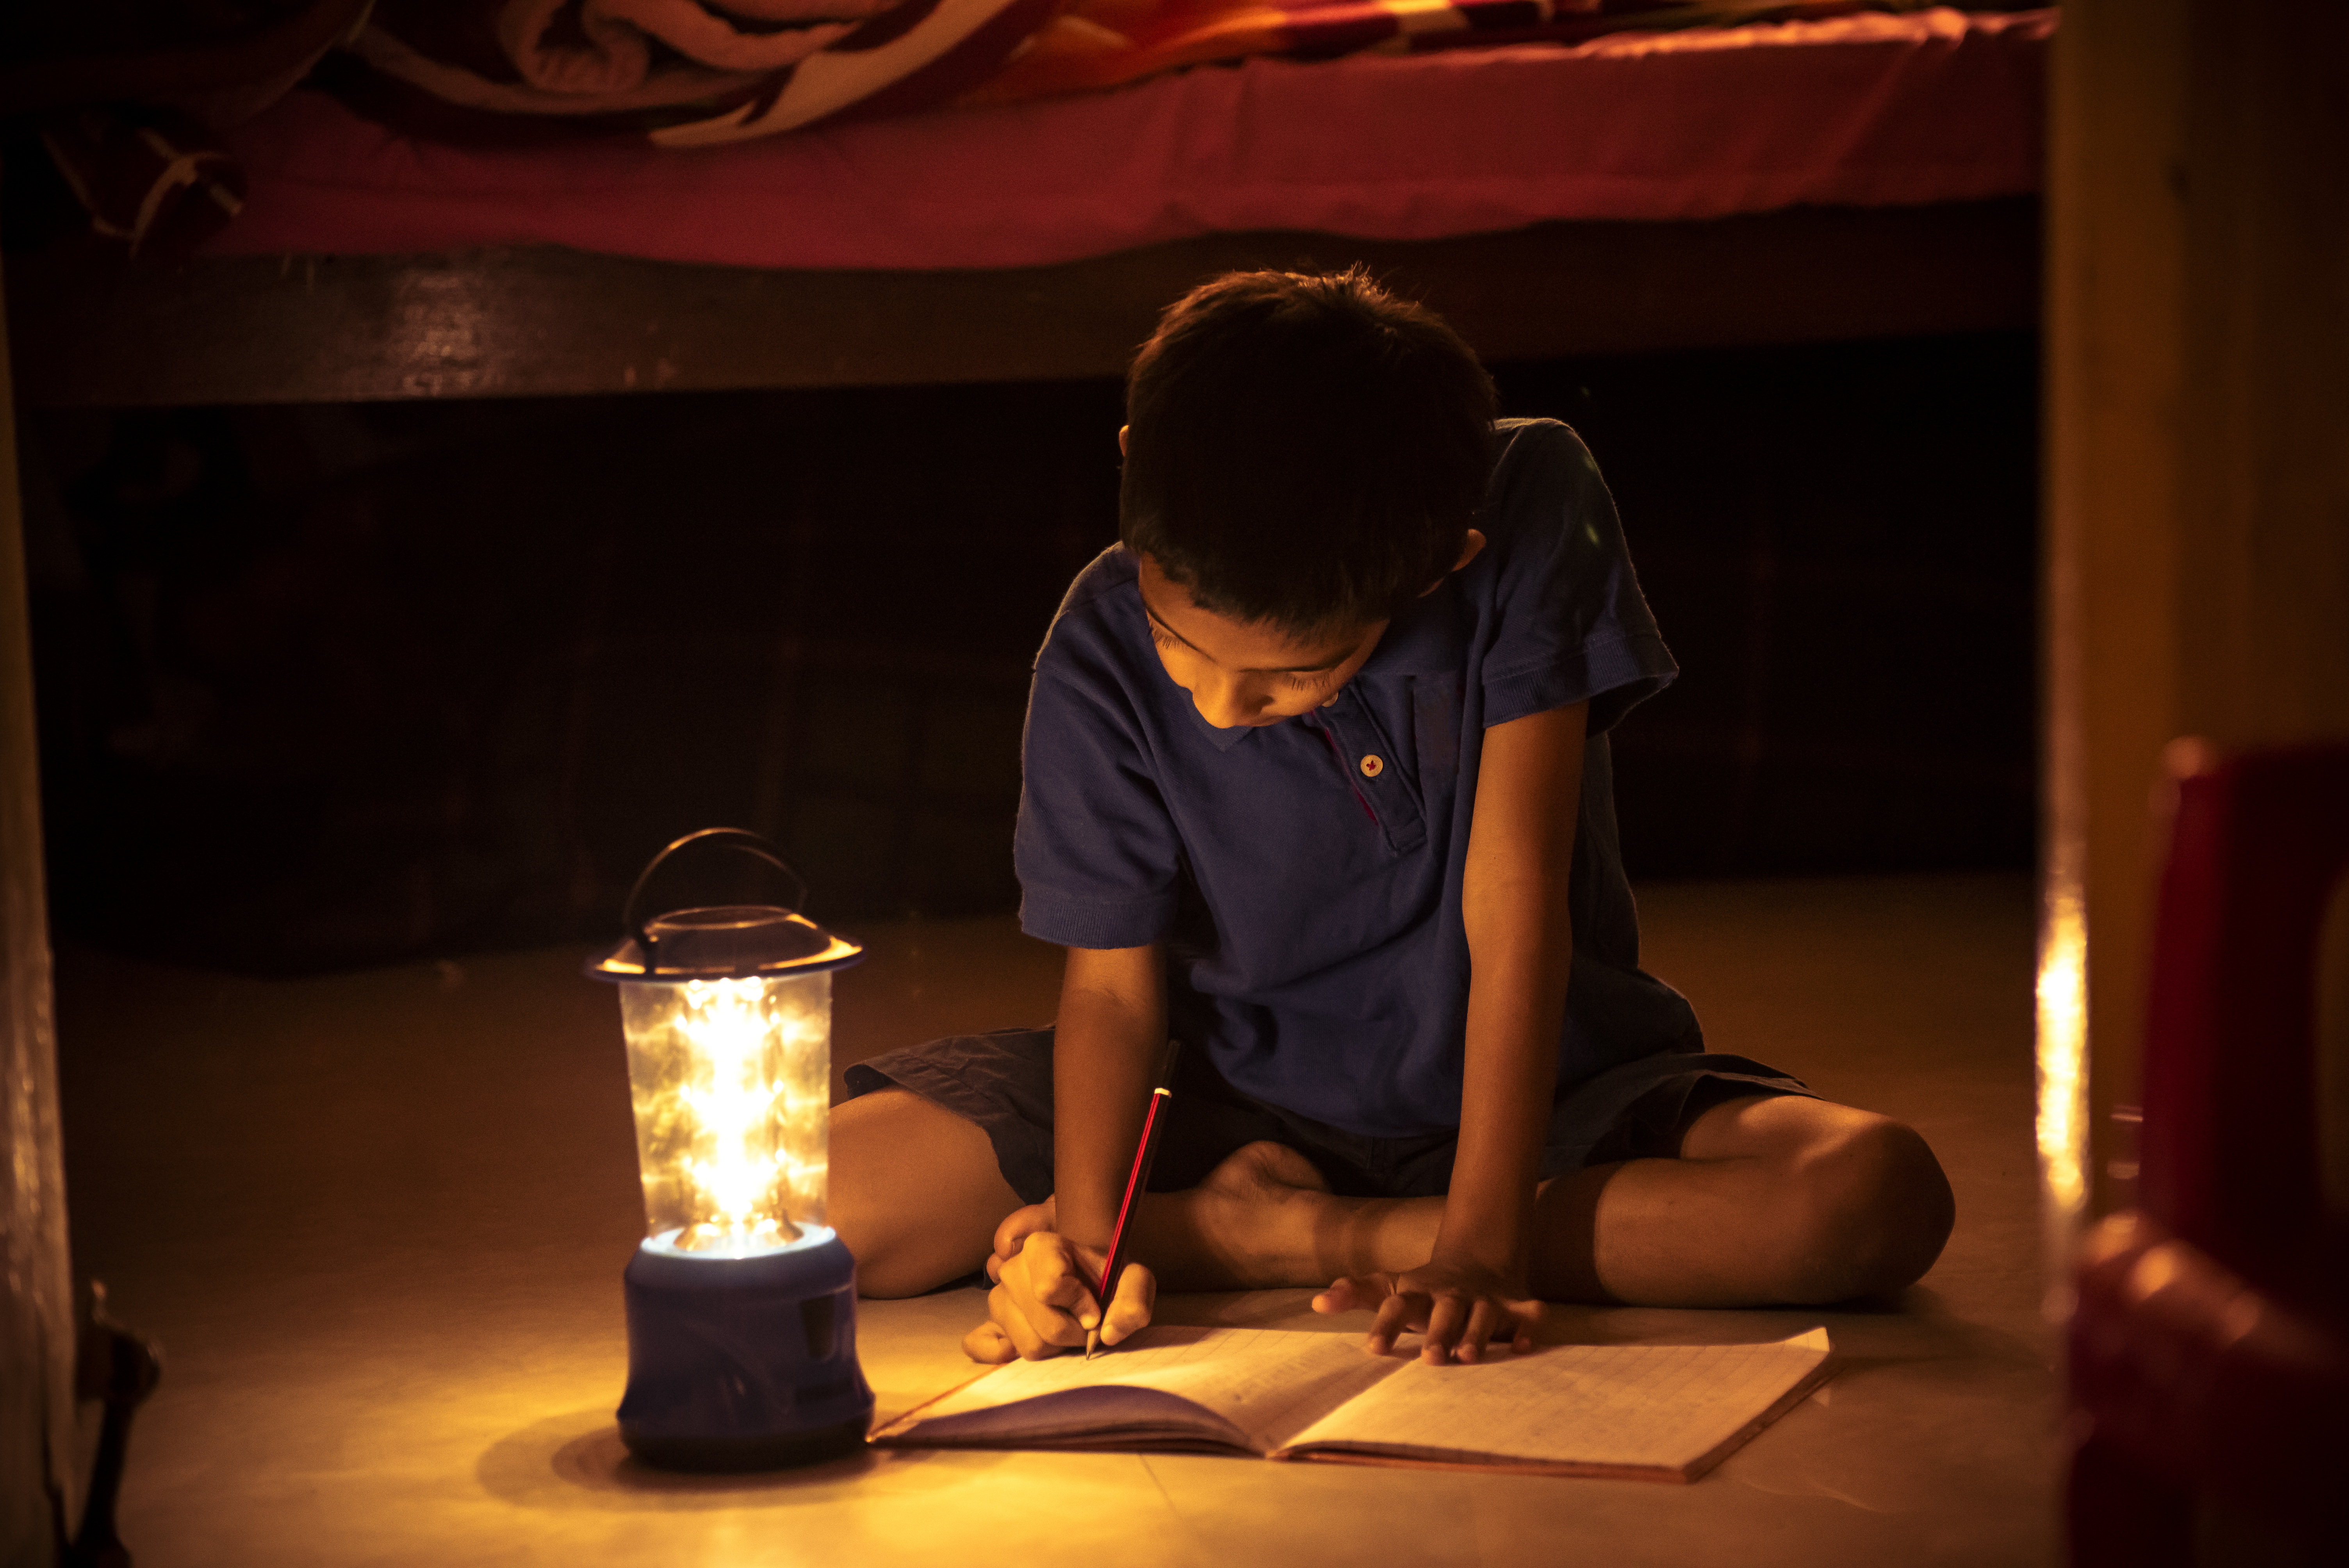 7 years Indian Boy studying under lamp